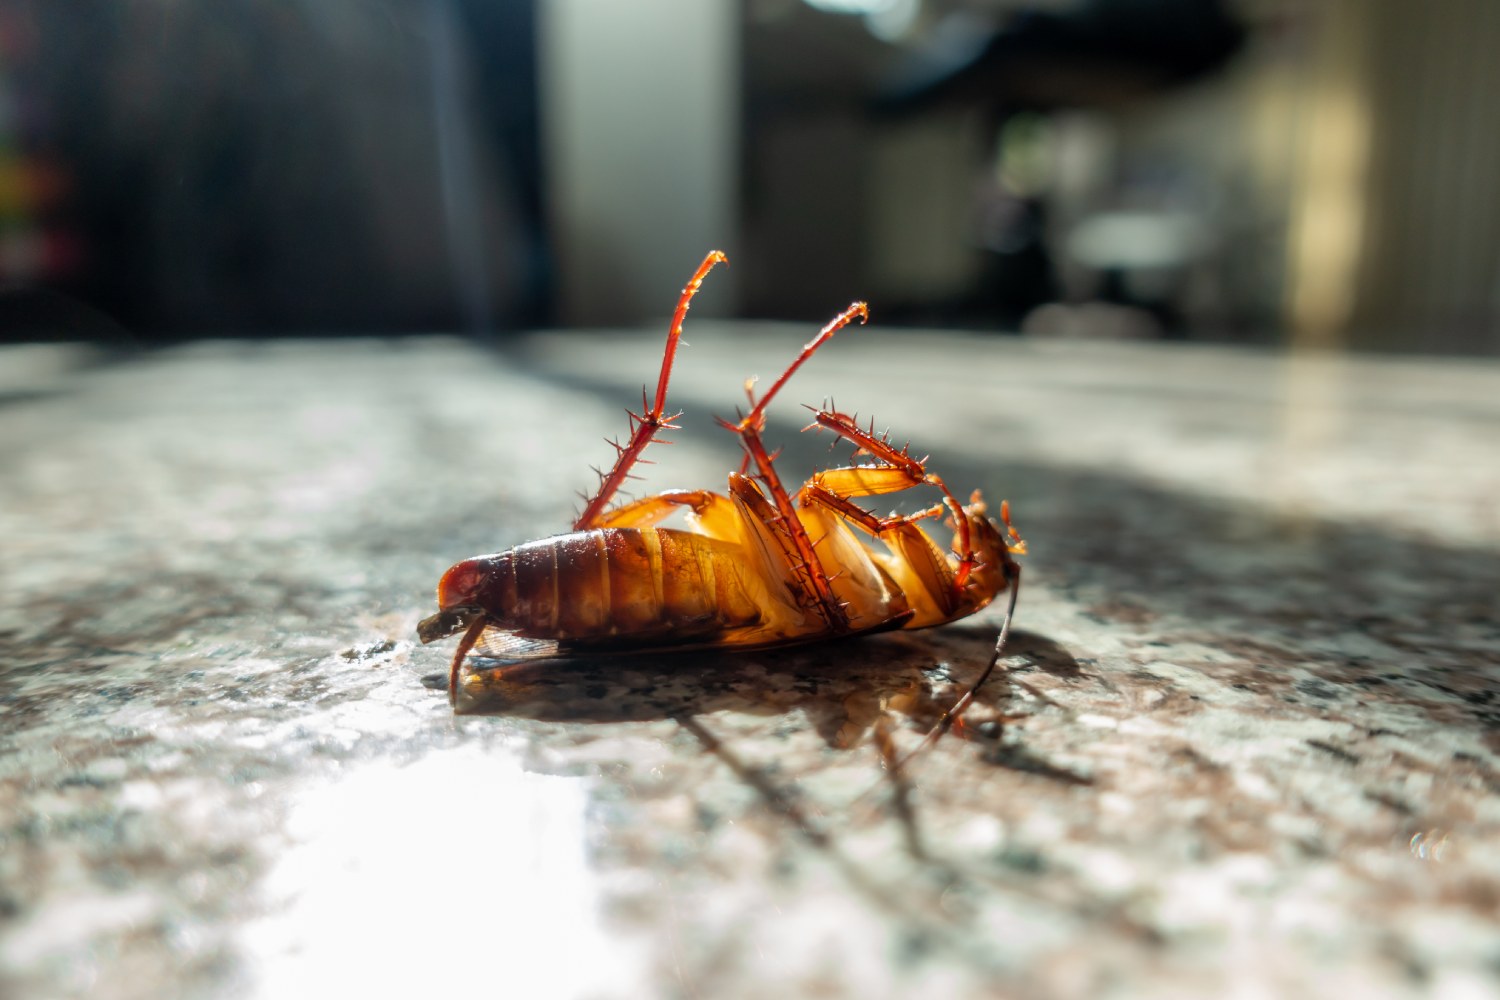 roach laying on floor